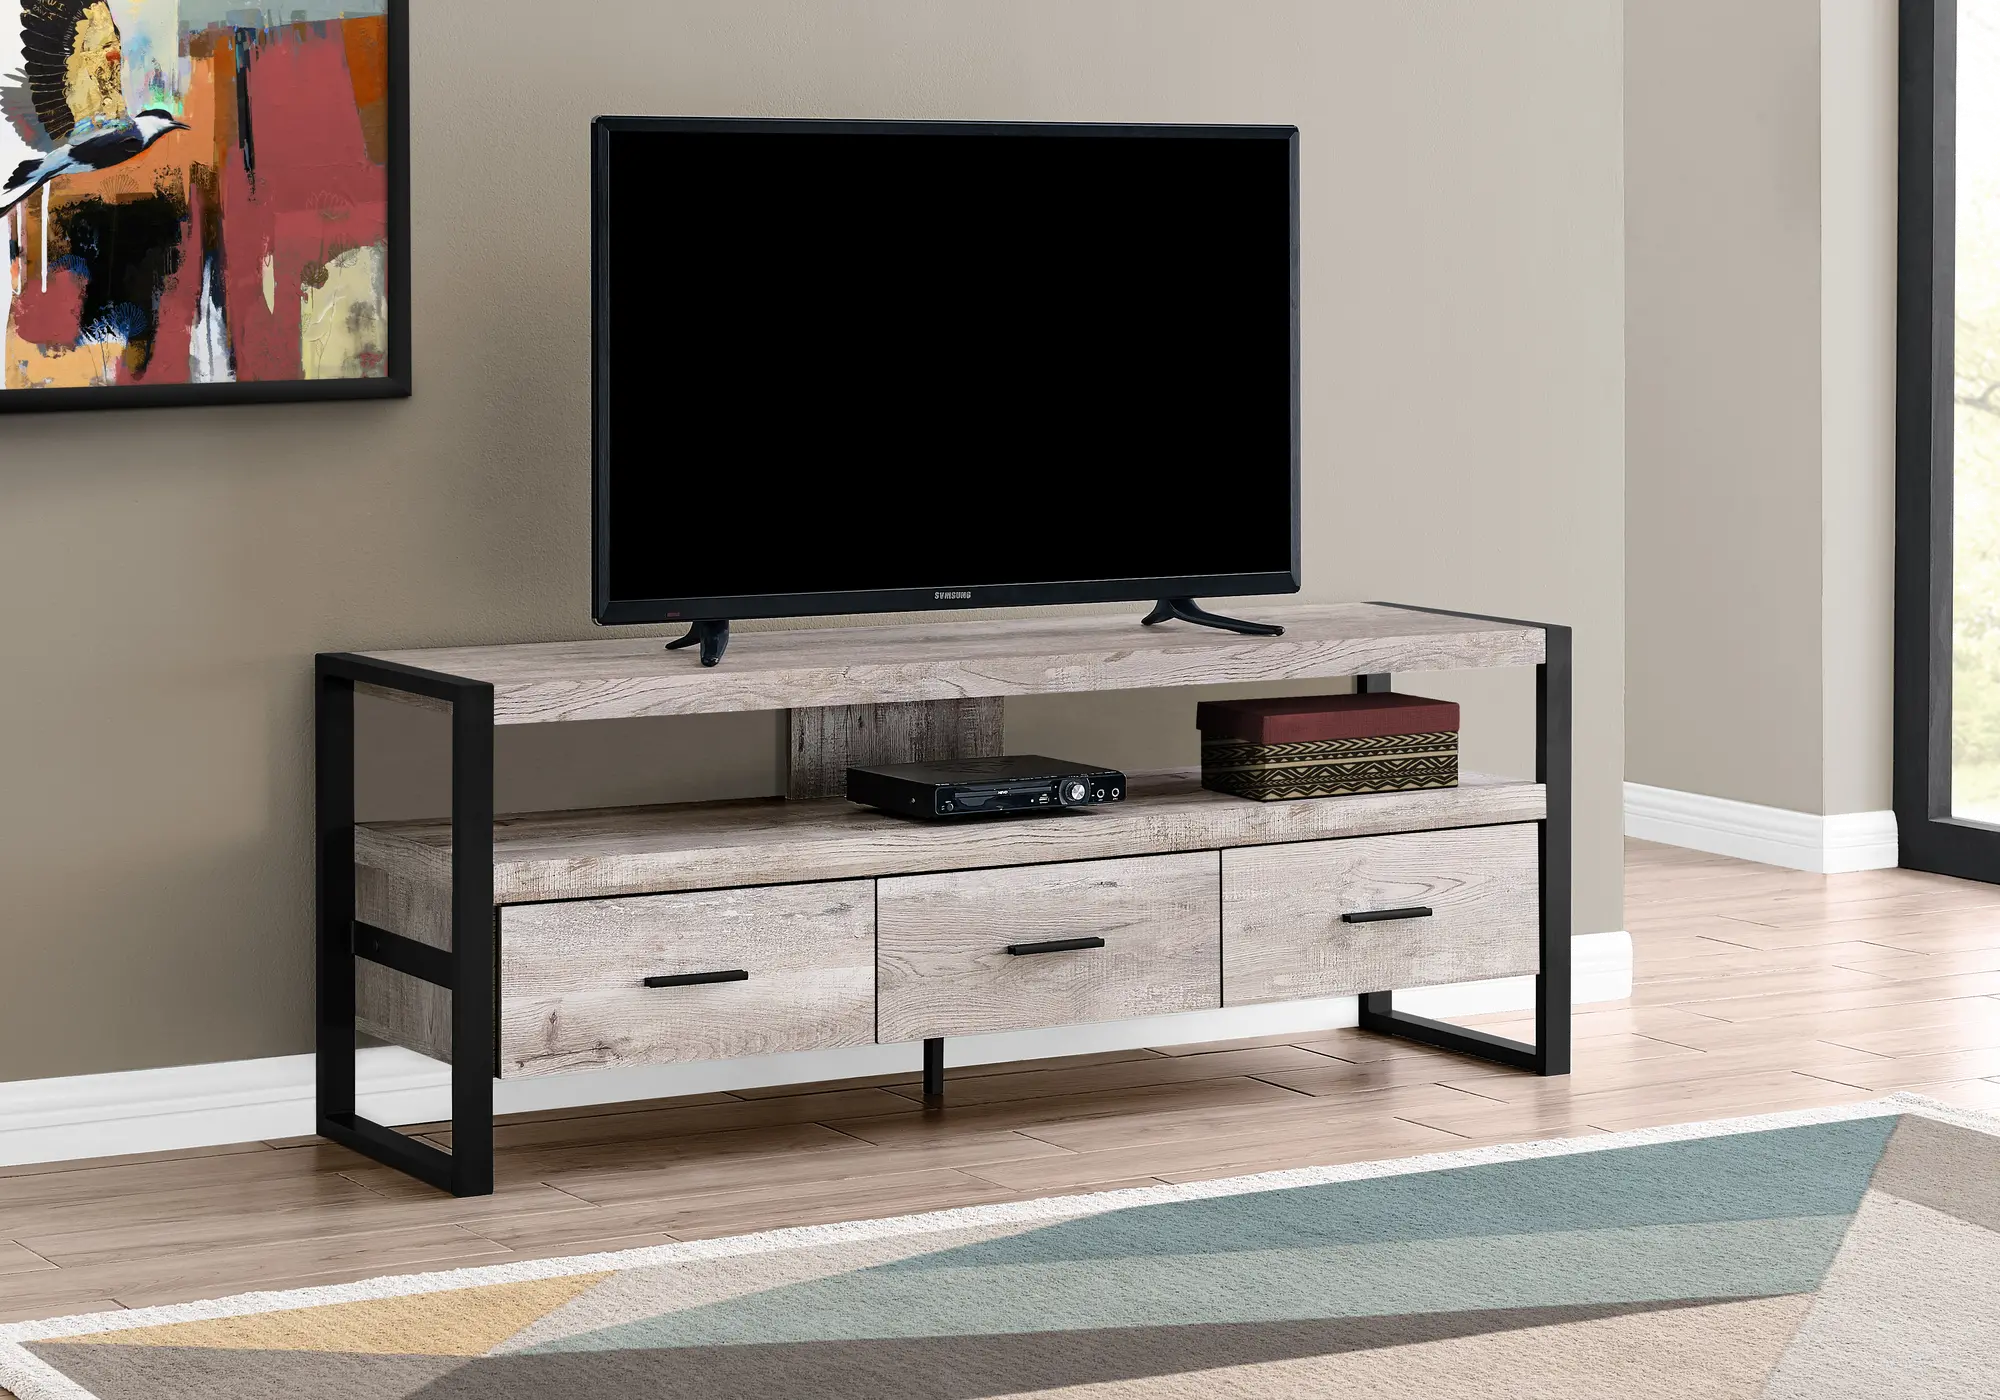 Photos - Mount/Stand Monarch Specialties Industrial Taupe 3 Drawer TV Stand I 2822 